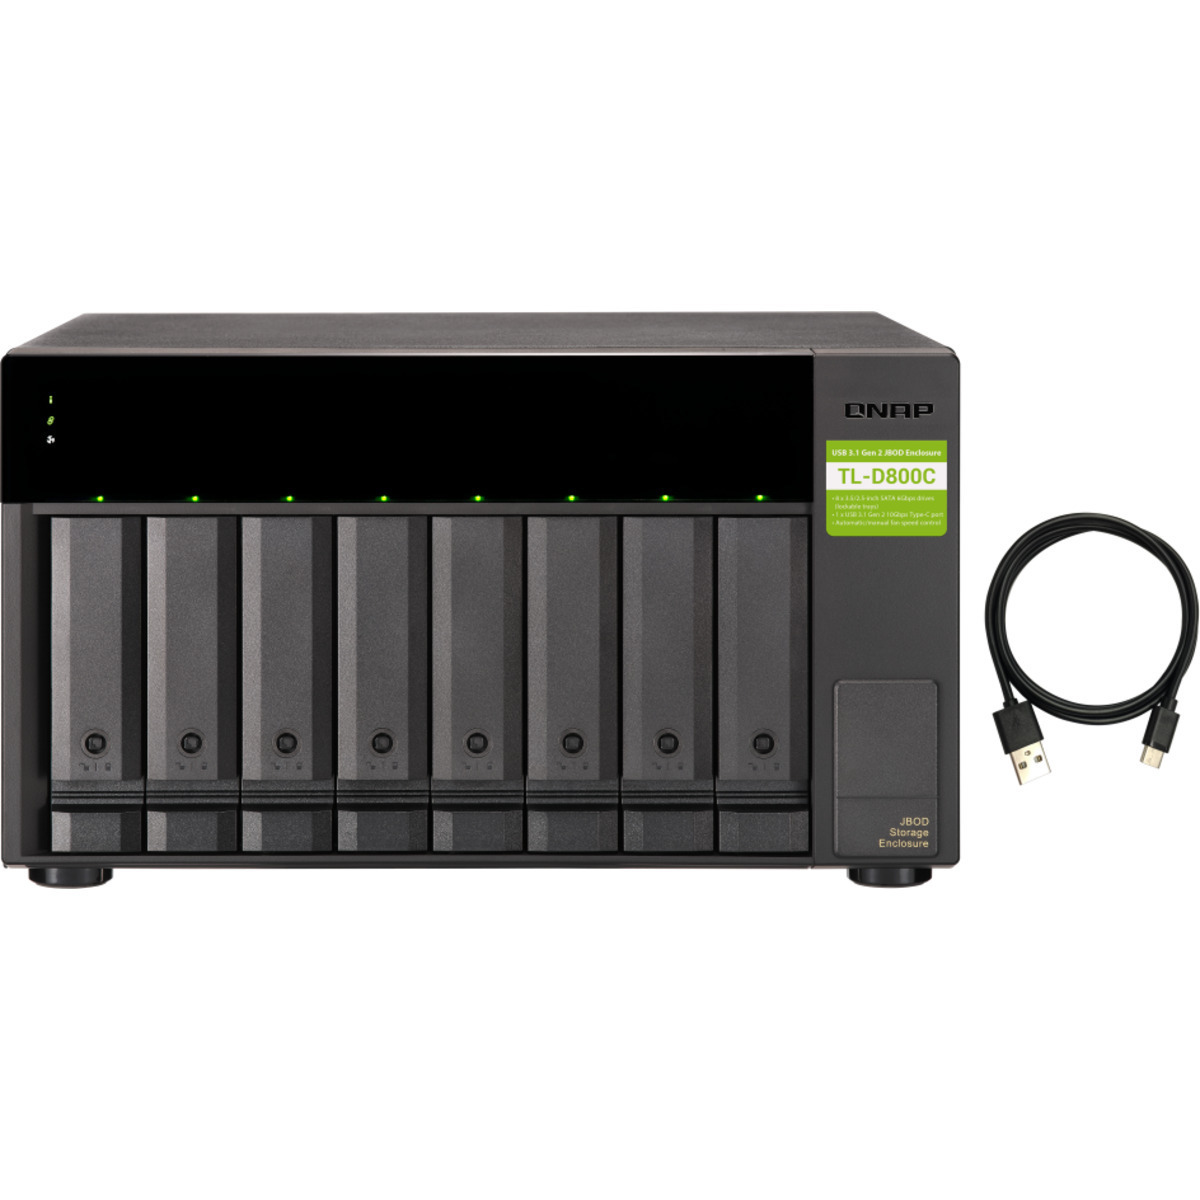 QNAP TL-D800C External Expansion Drive 24tb 8-Bay Desktop Multimedia / Power User / Business Expansion Enclosure 6x4tb Western Digital Red SA500 WDS400T1R0A 2.5 560/530MB/s SATA 6Gb/s SSD NAS Class Drives Installed - Burn-In Tested TL-D800C External Expansion Drive